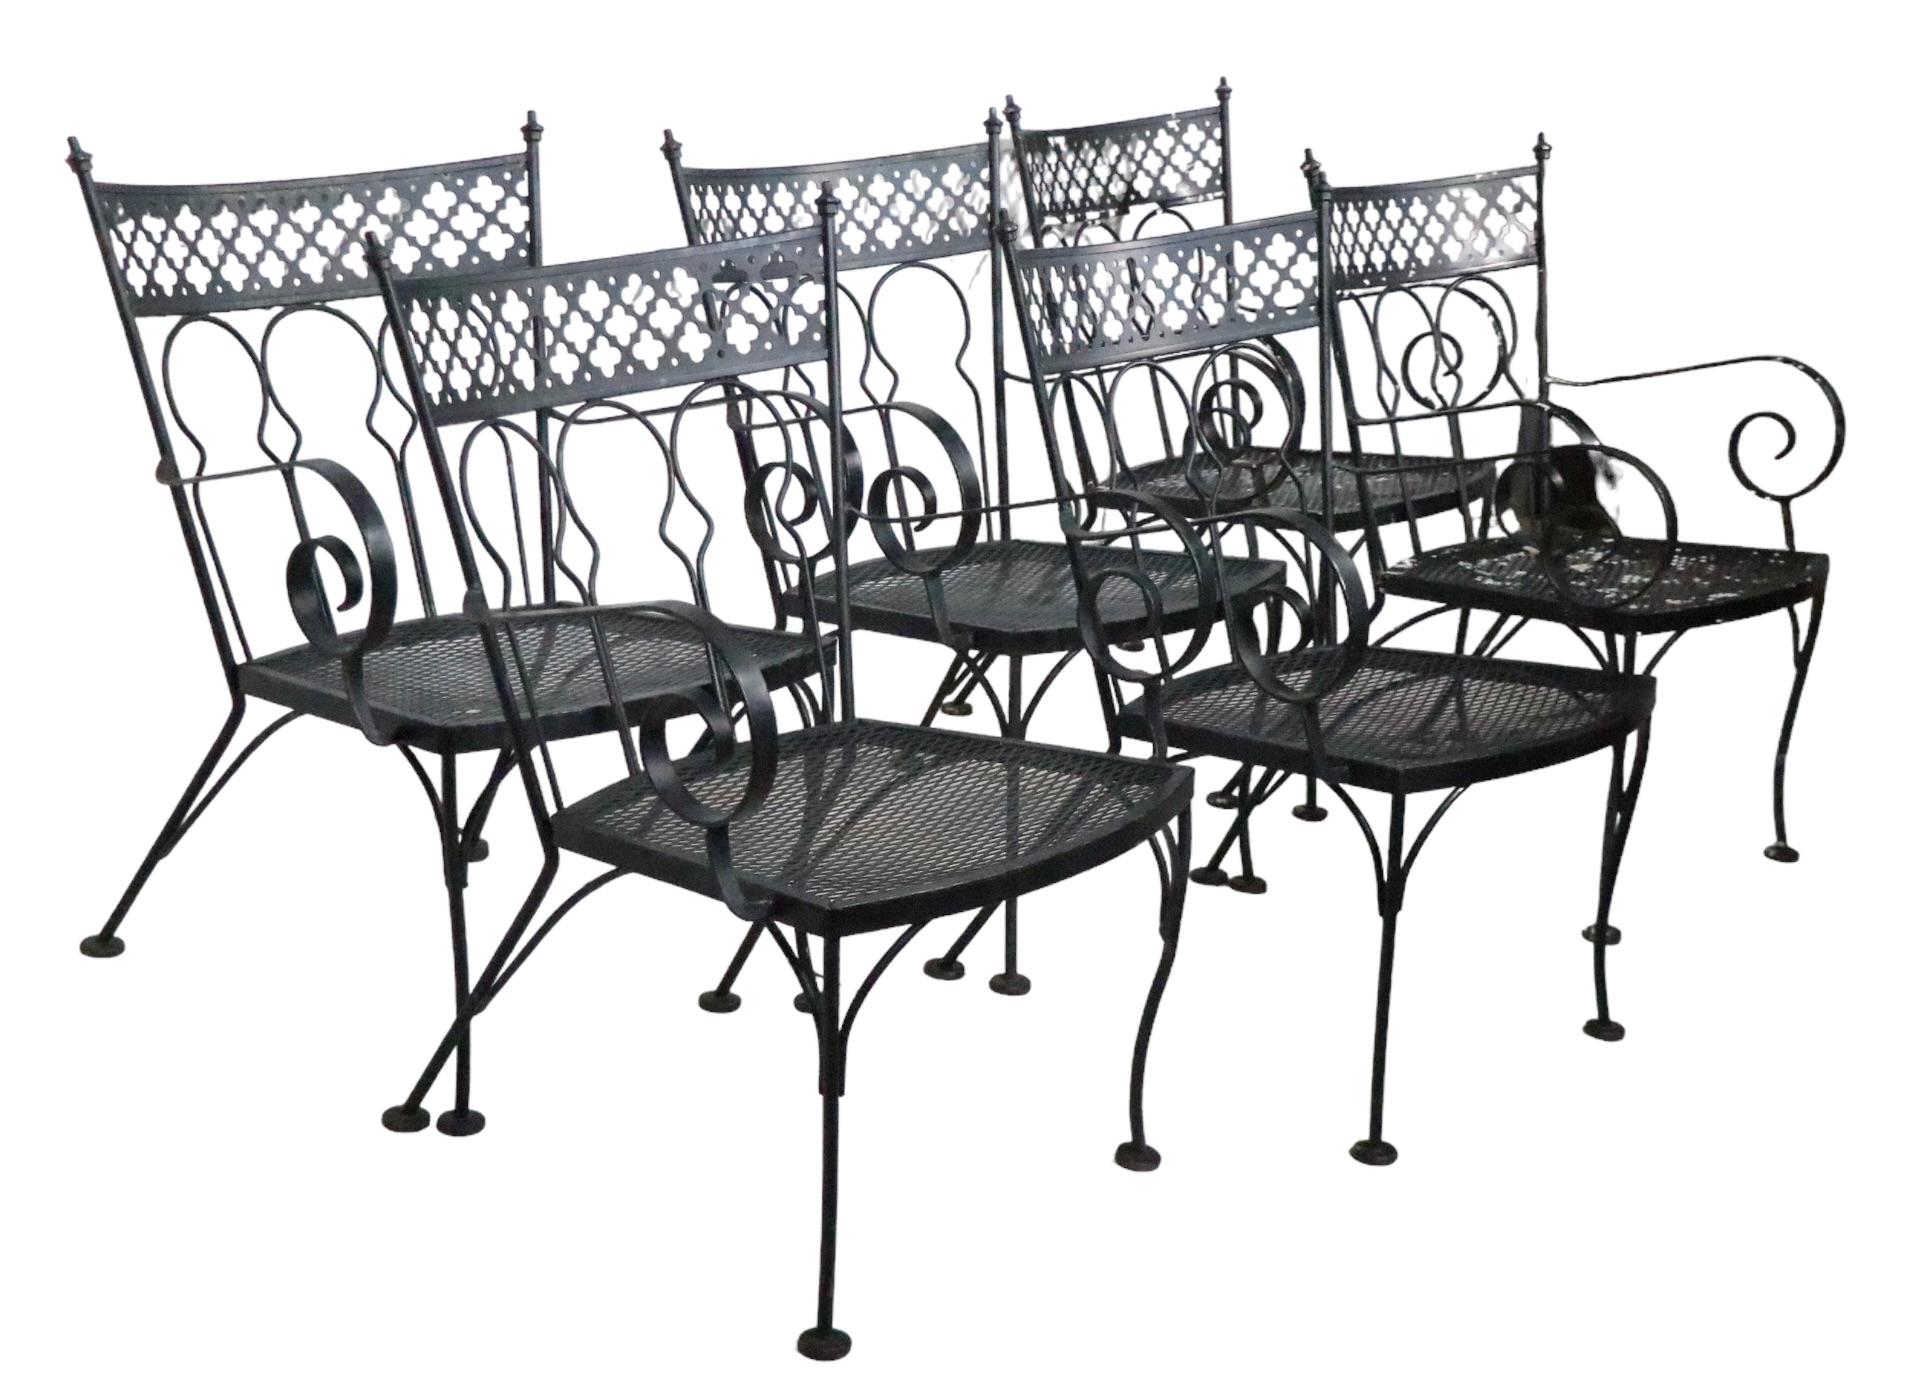 Rare set of six matching dining chairs in the sought after Taj Mahal pattern, by Salterini. The chairs feature decorative wrought iron frames and stylized back rests, with cast finials, and metal mesh seats. All are in very fine condition,